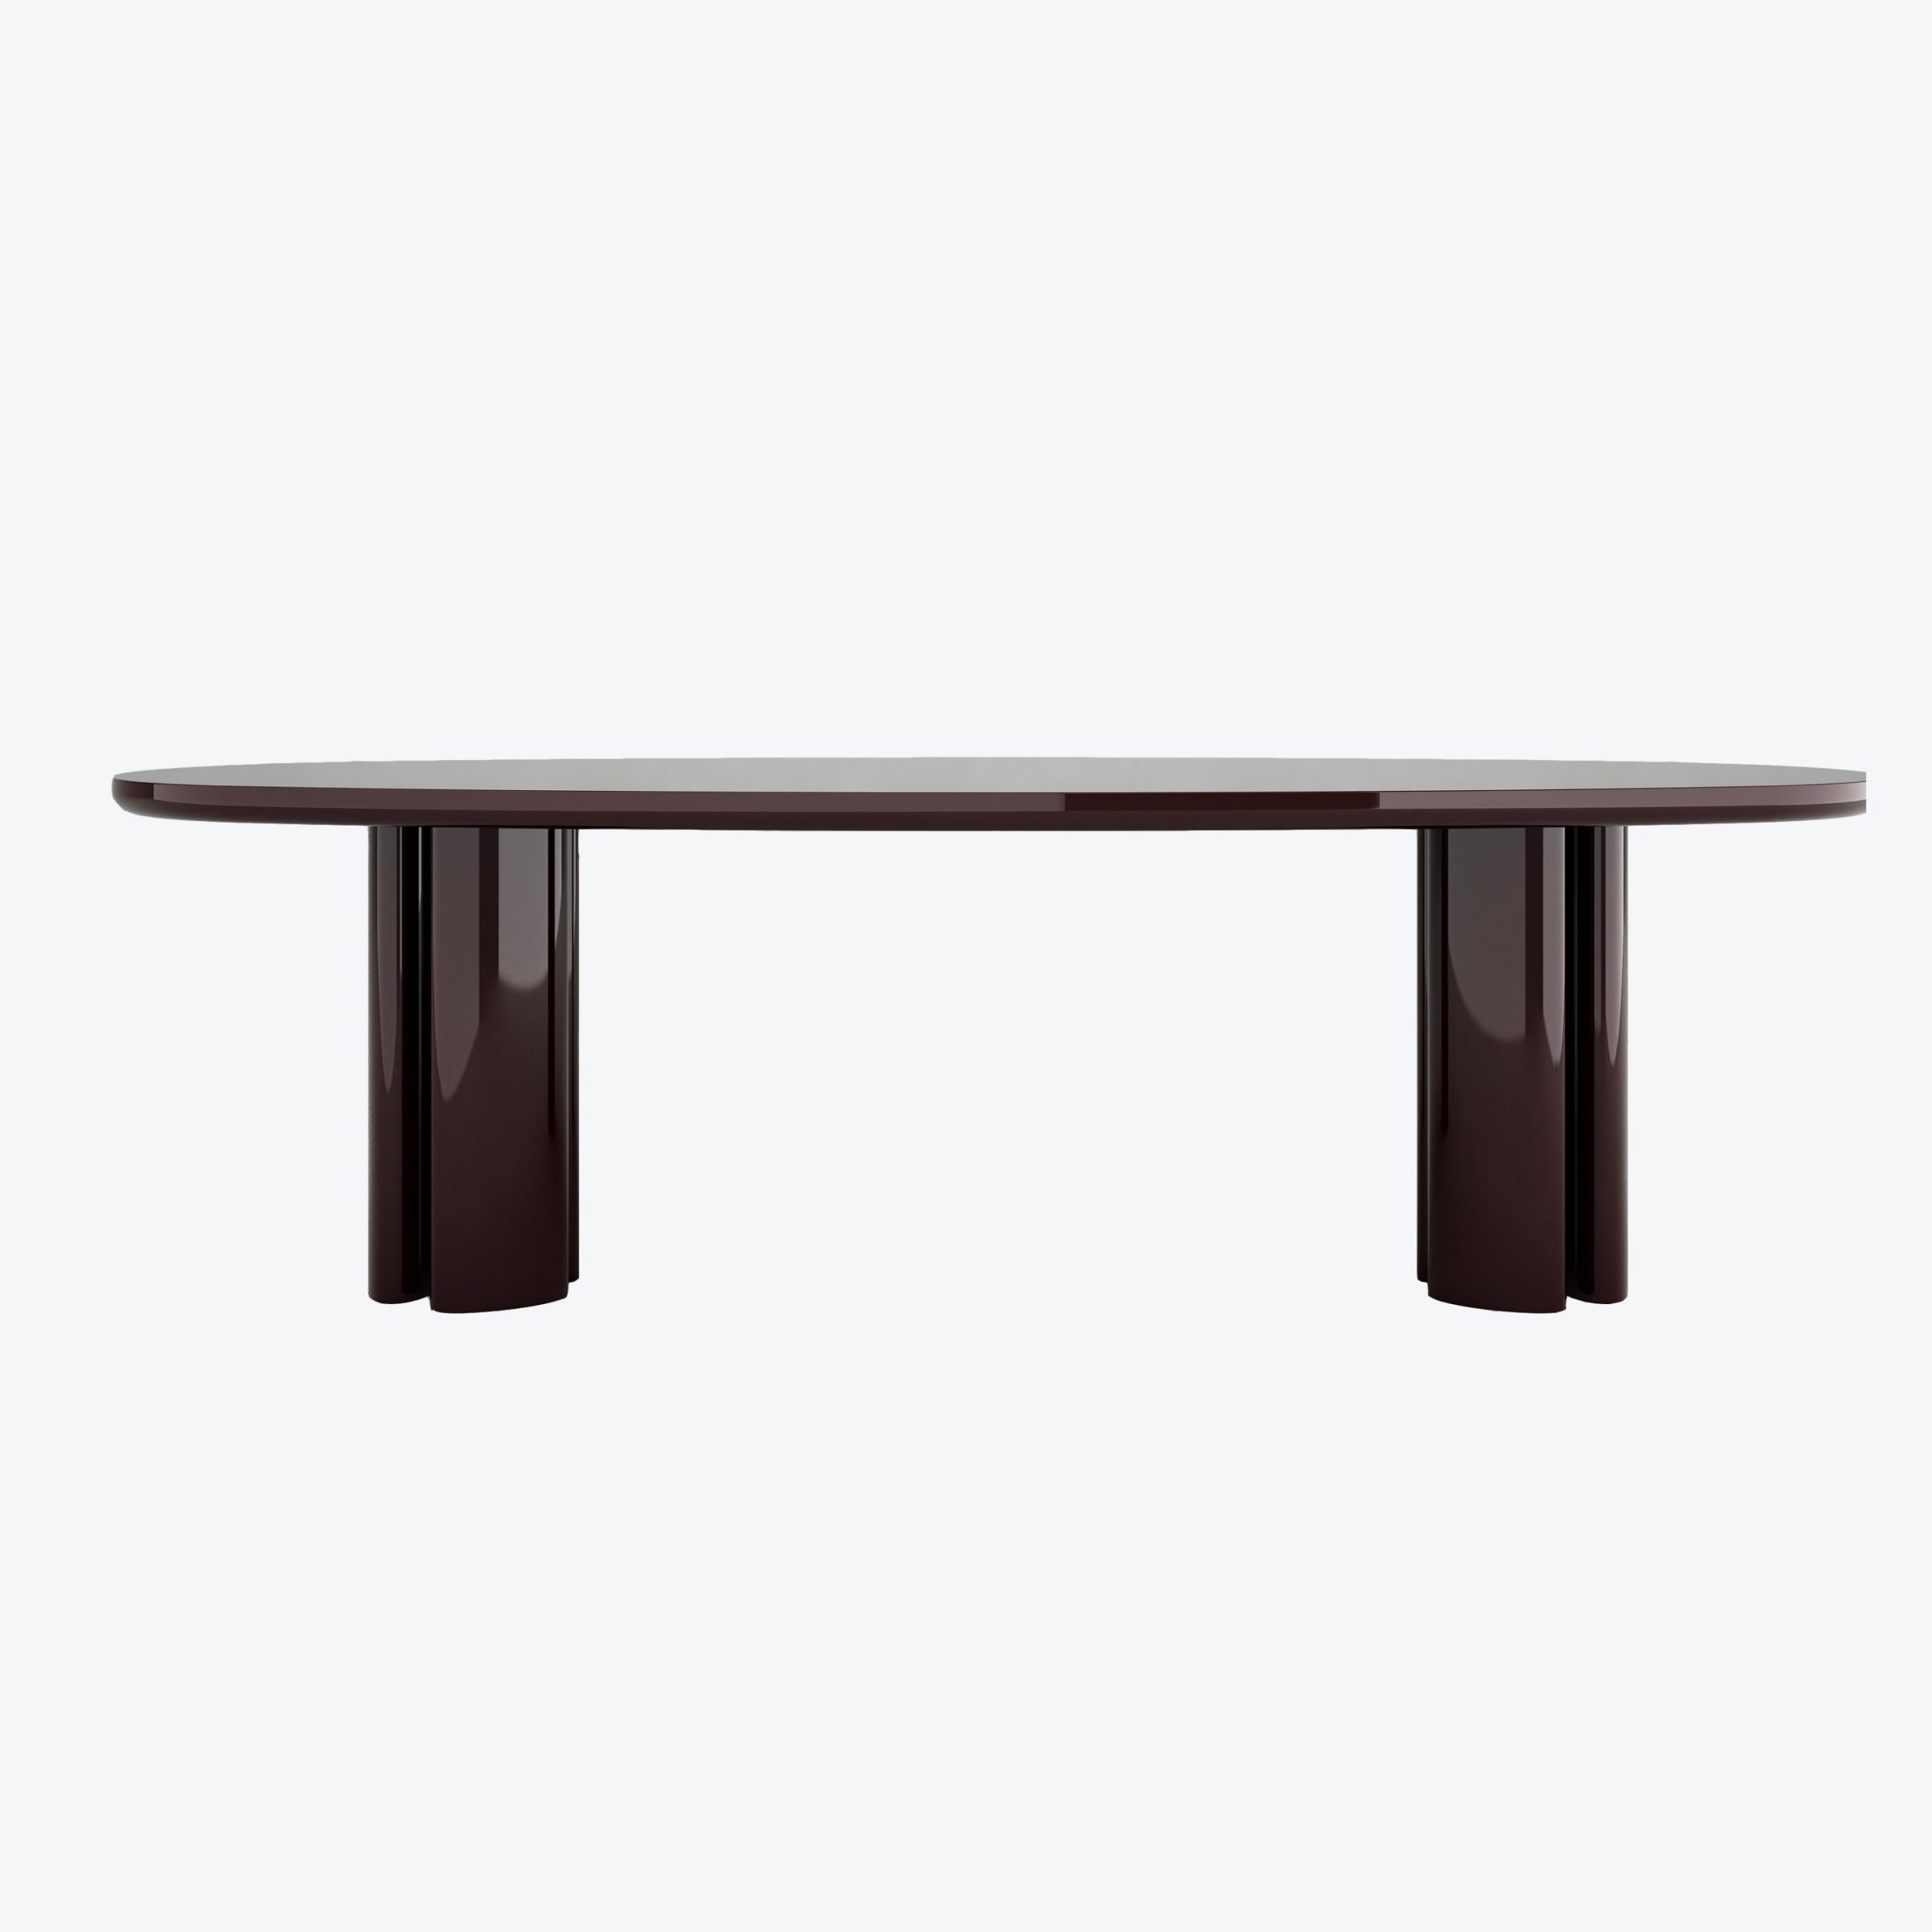 Francesco Dining Burgundy Collection Balzano Swan Invisible The Lacquer Table